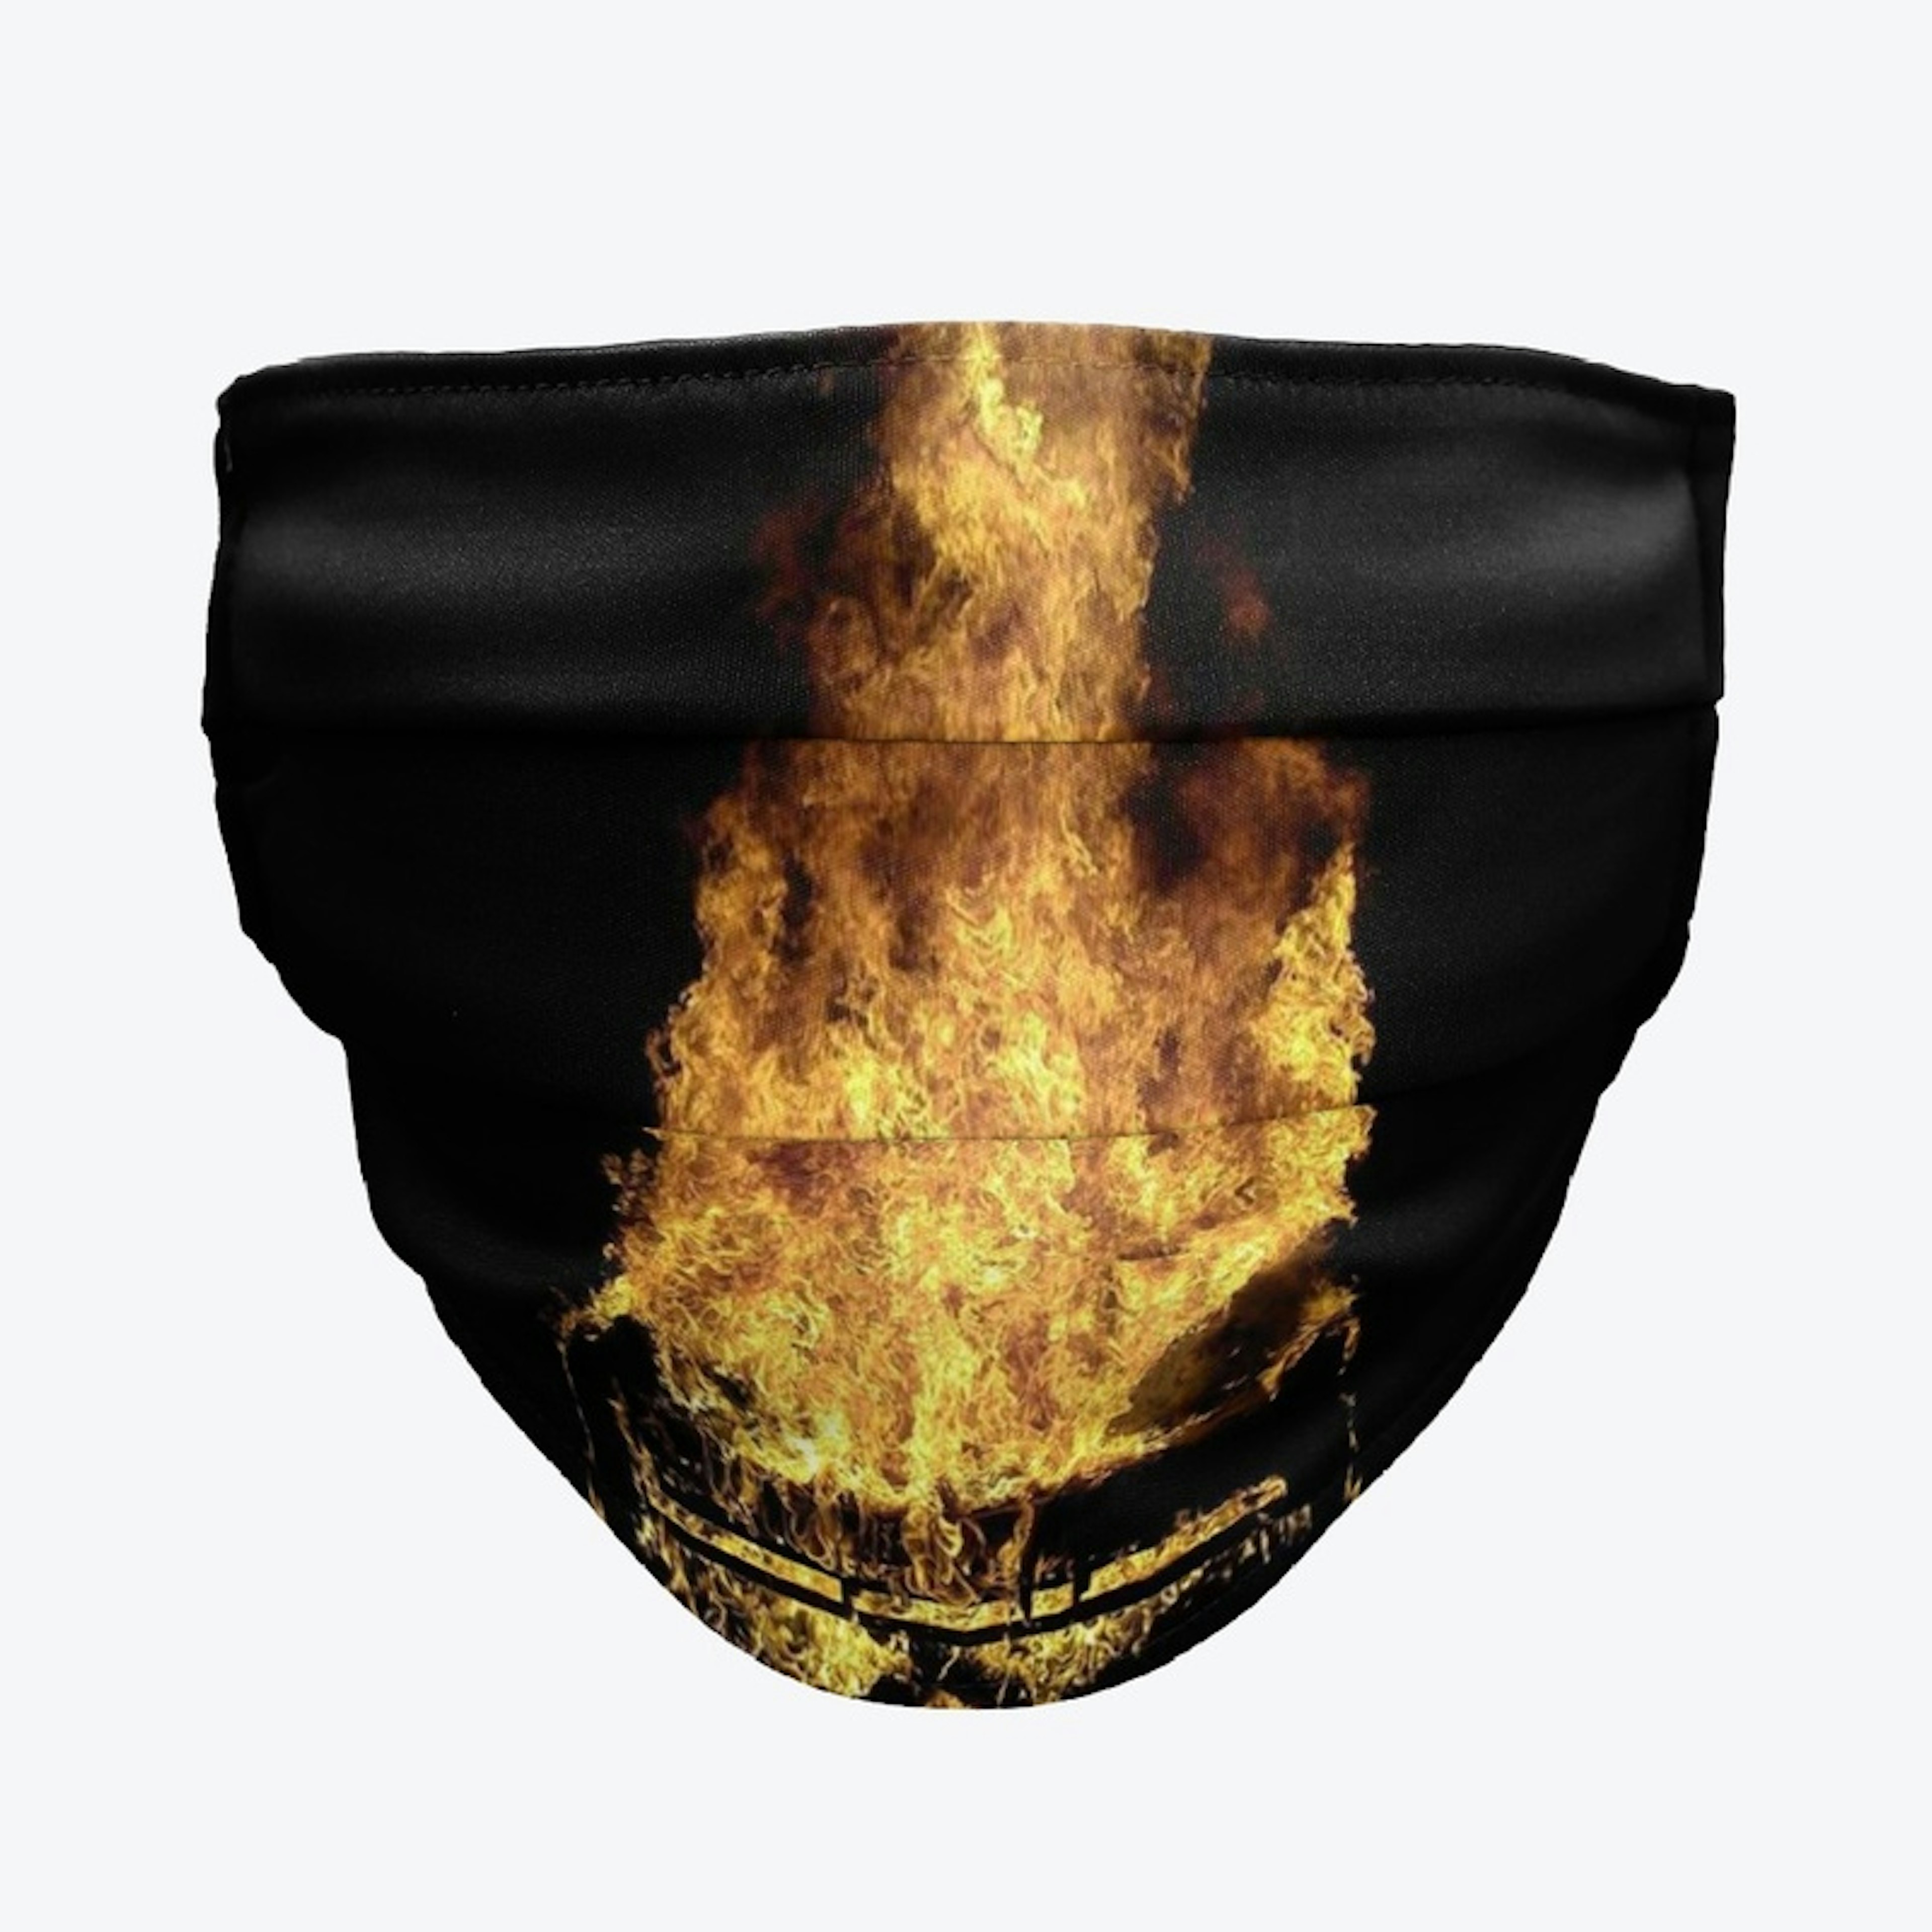 Scatterbox "Fire" Facemask